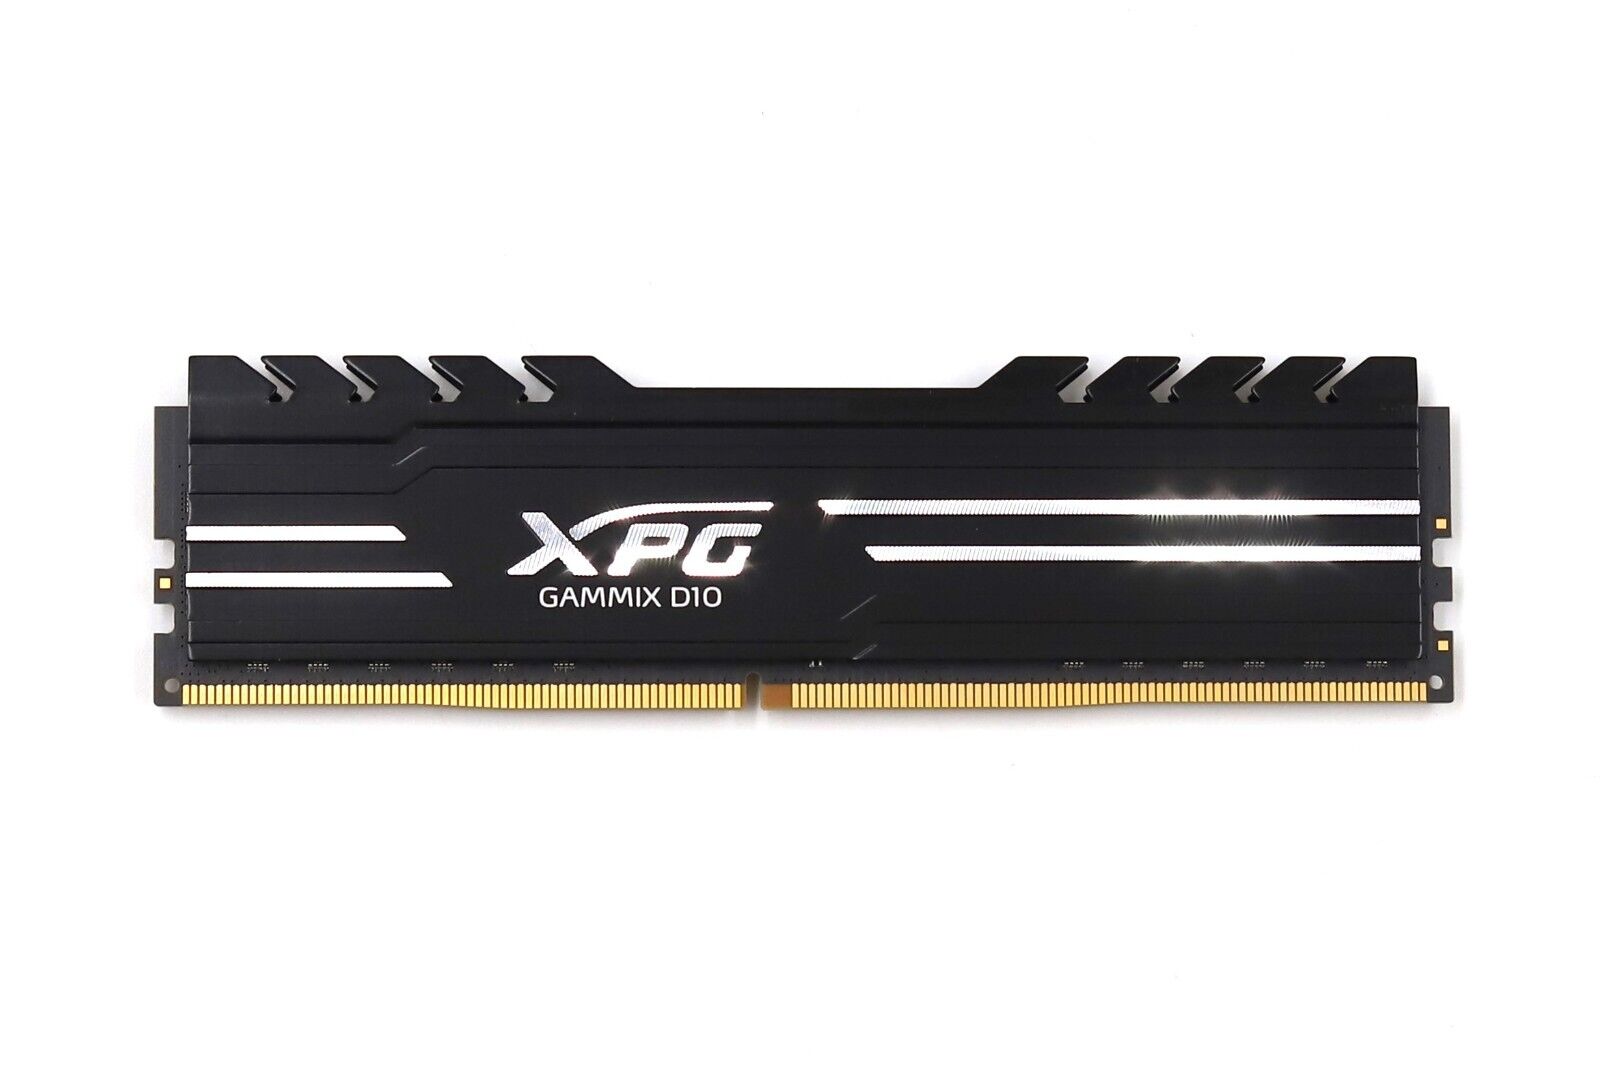 Adata XPG 8GB DDR4-3200MHz PC4-25600 Desktop RAM P/N: AX4U320038G16A-BB10 Tested